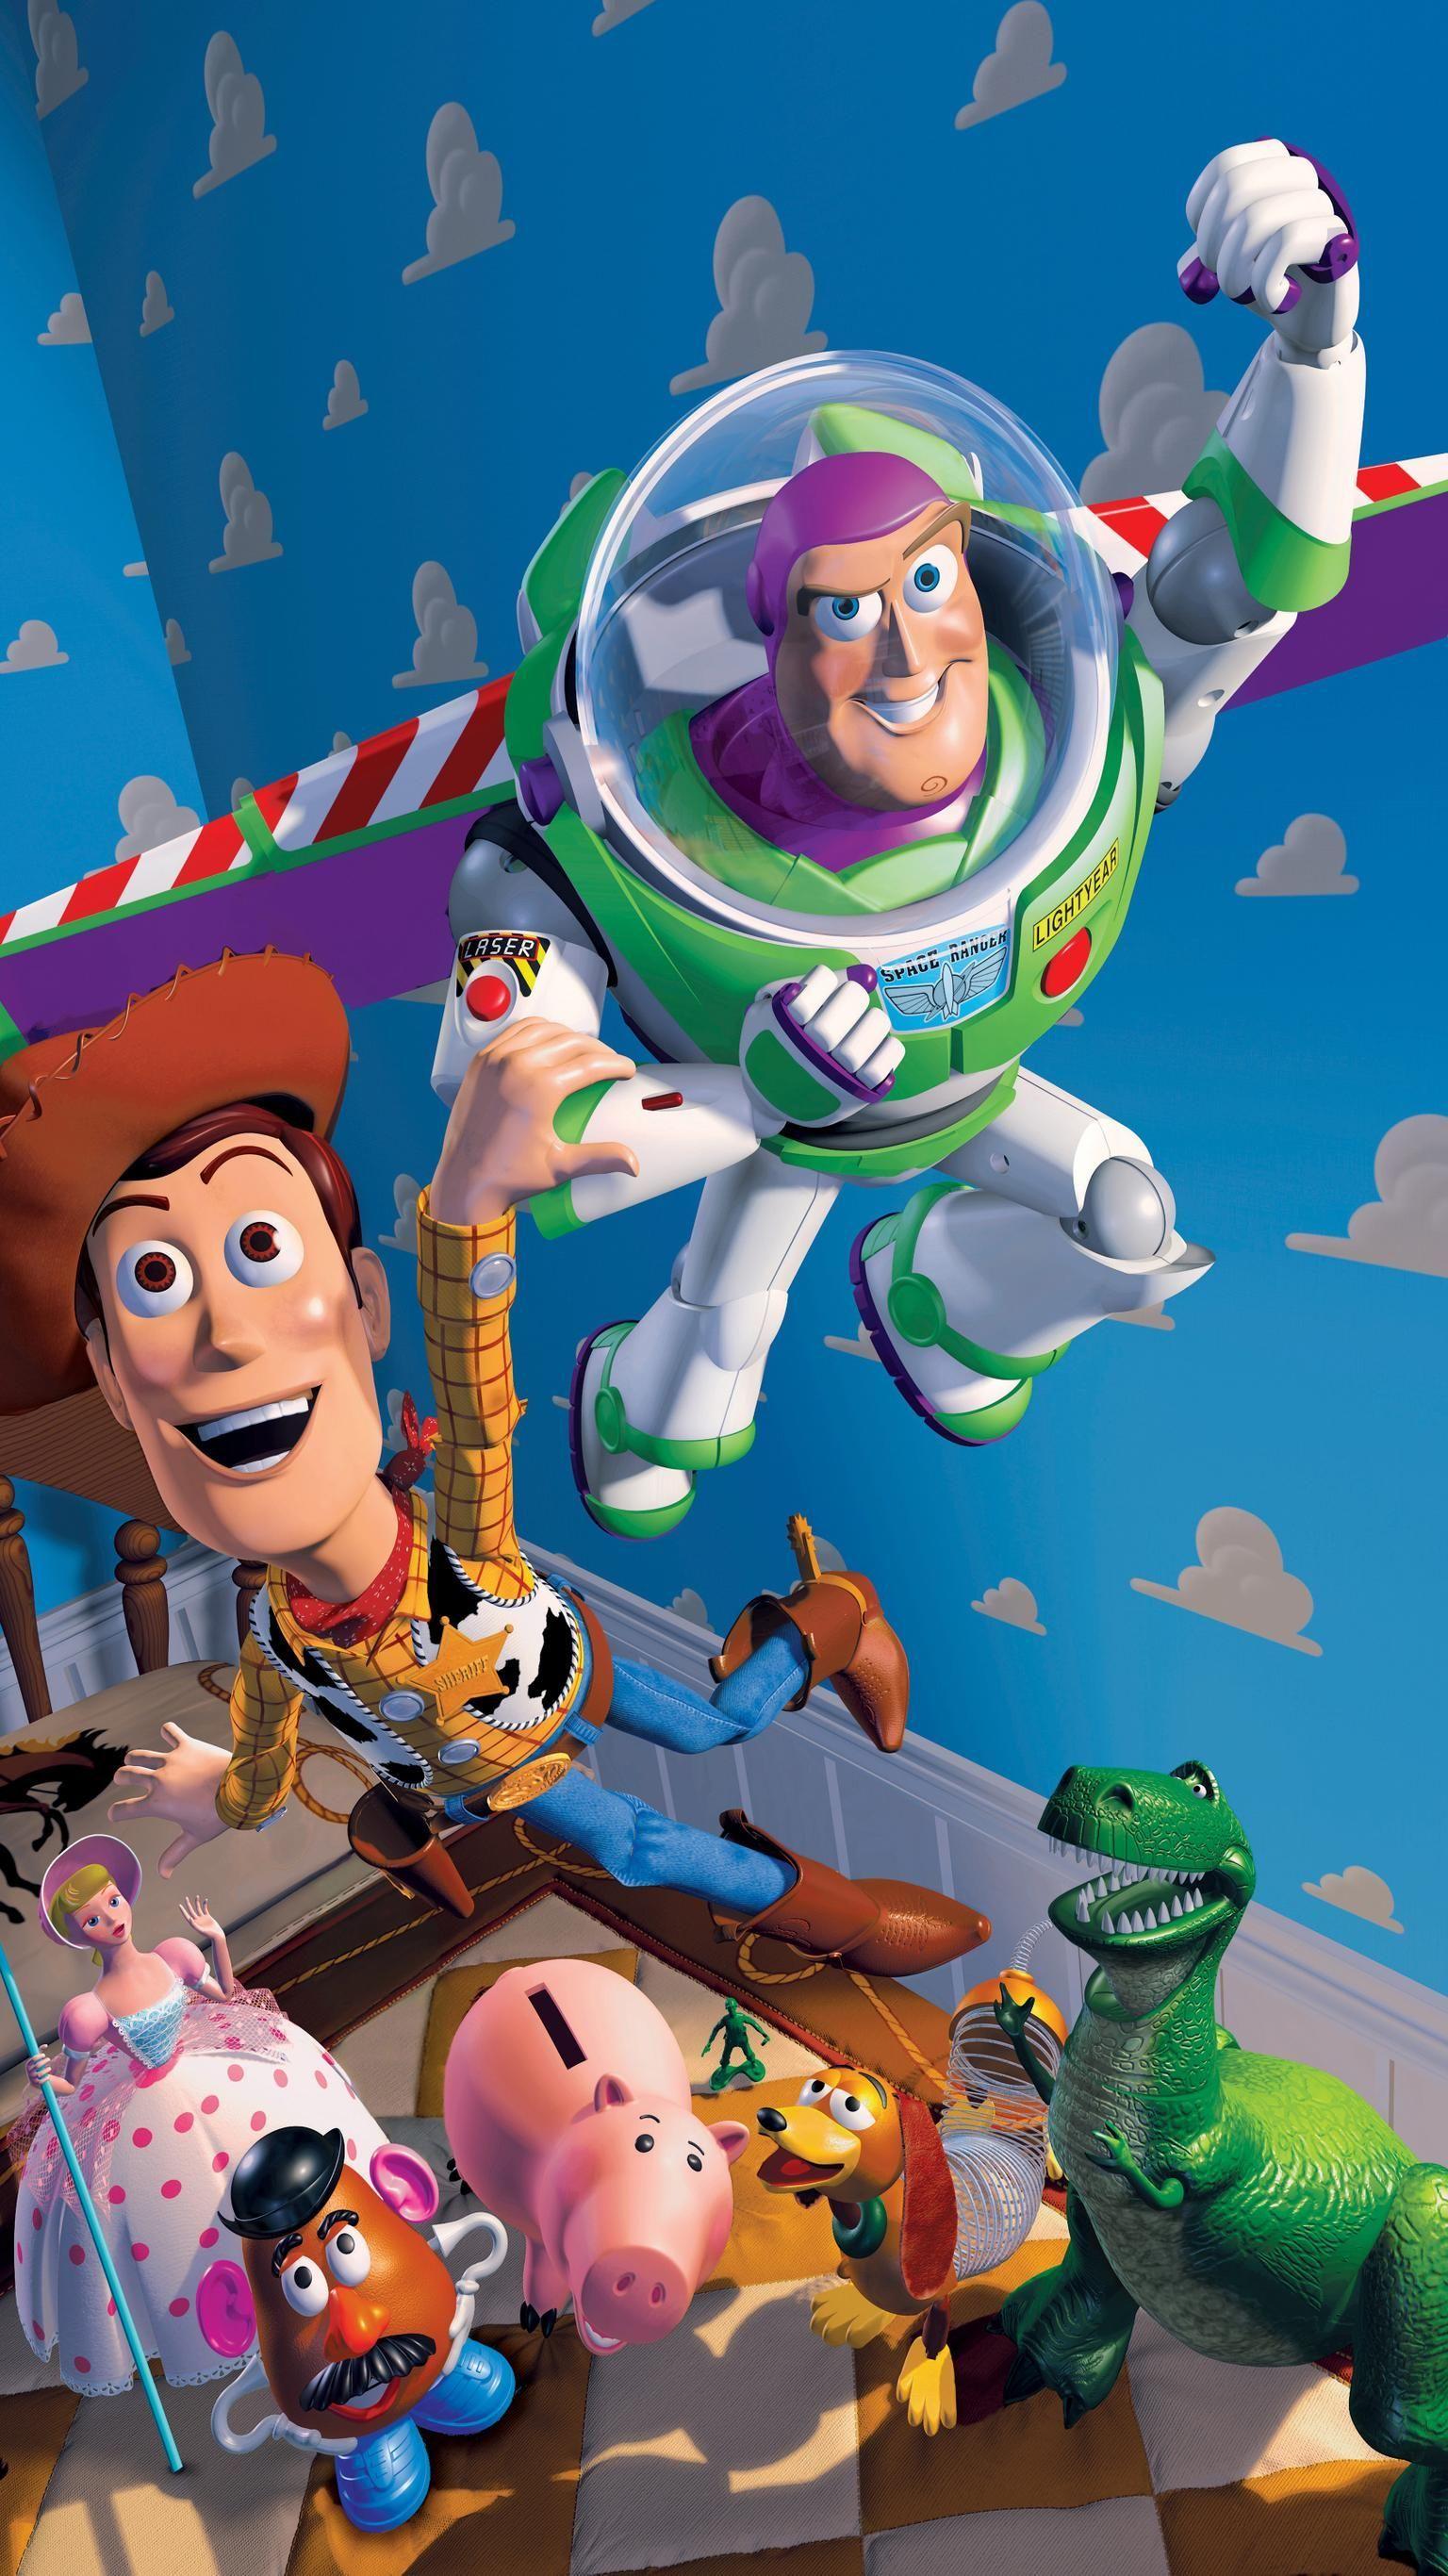 Toy Story (1995) Phone Wallpaper. Moviemania. Toy story Toy story movie, New toy story